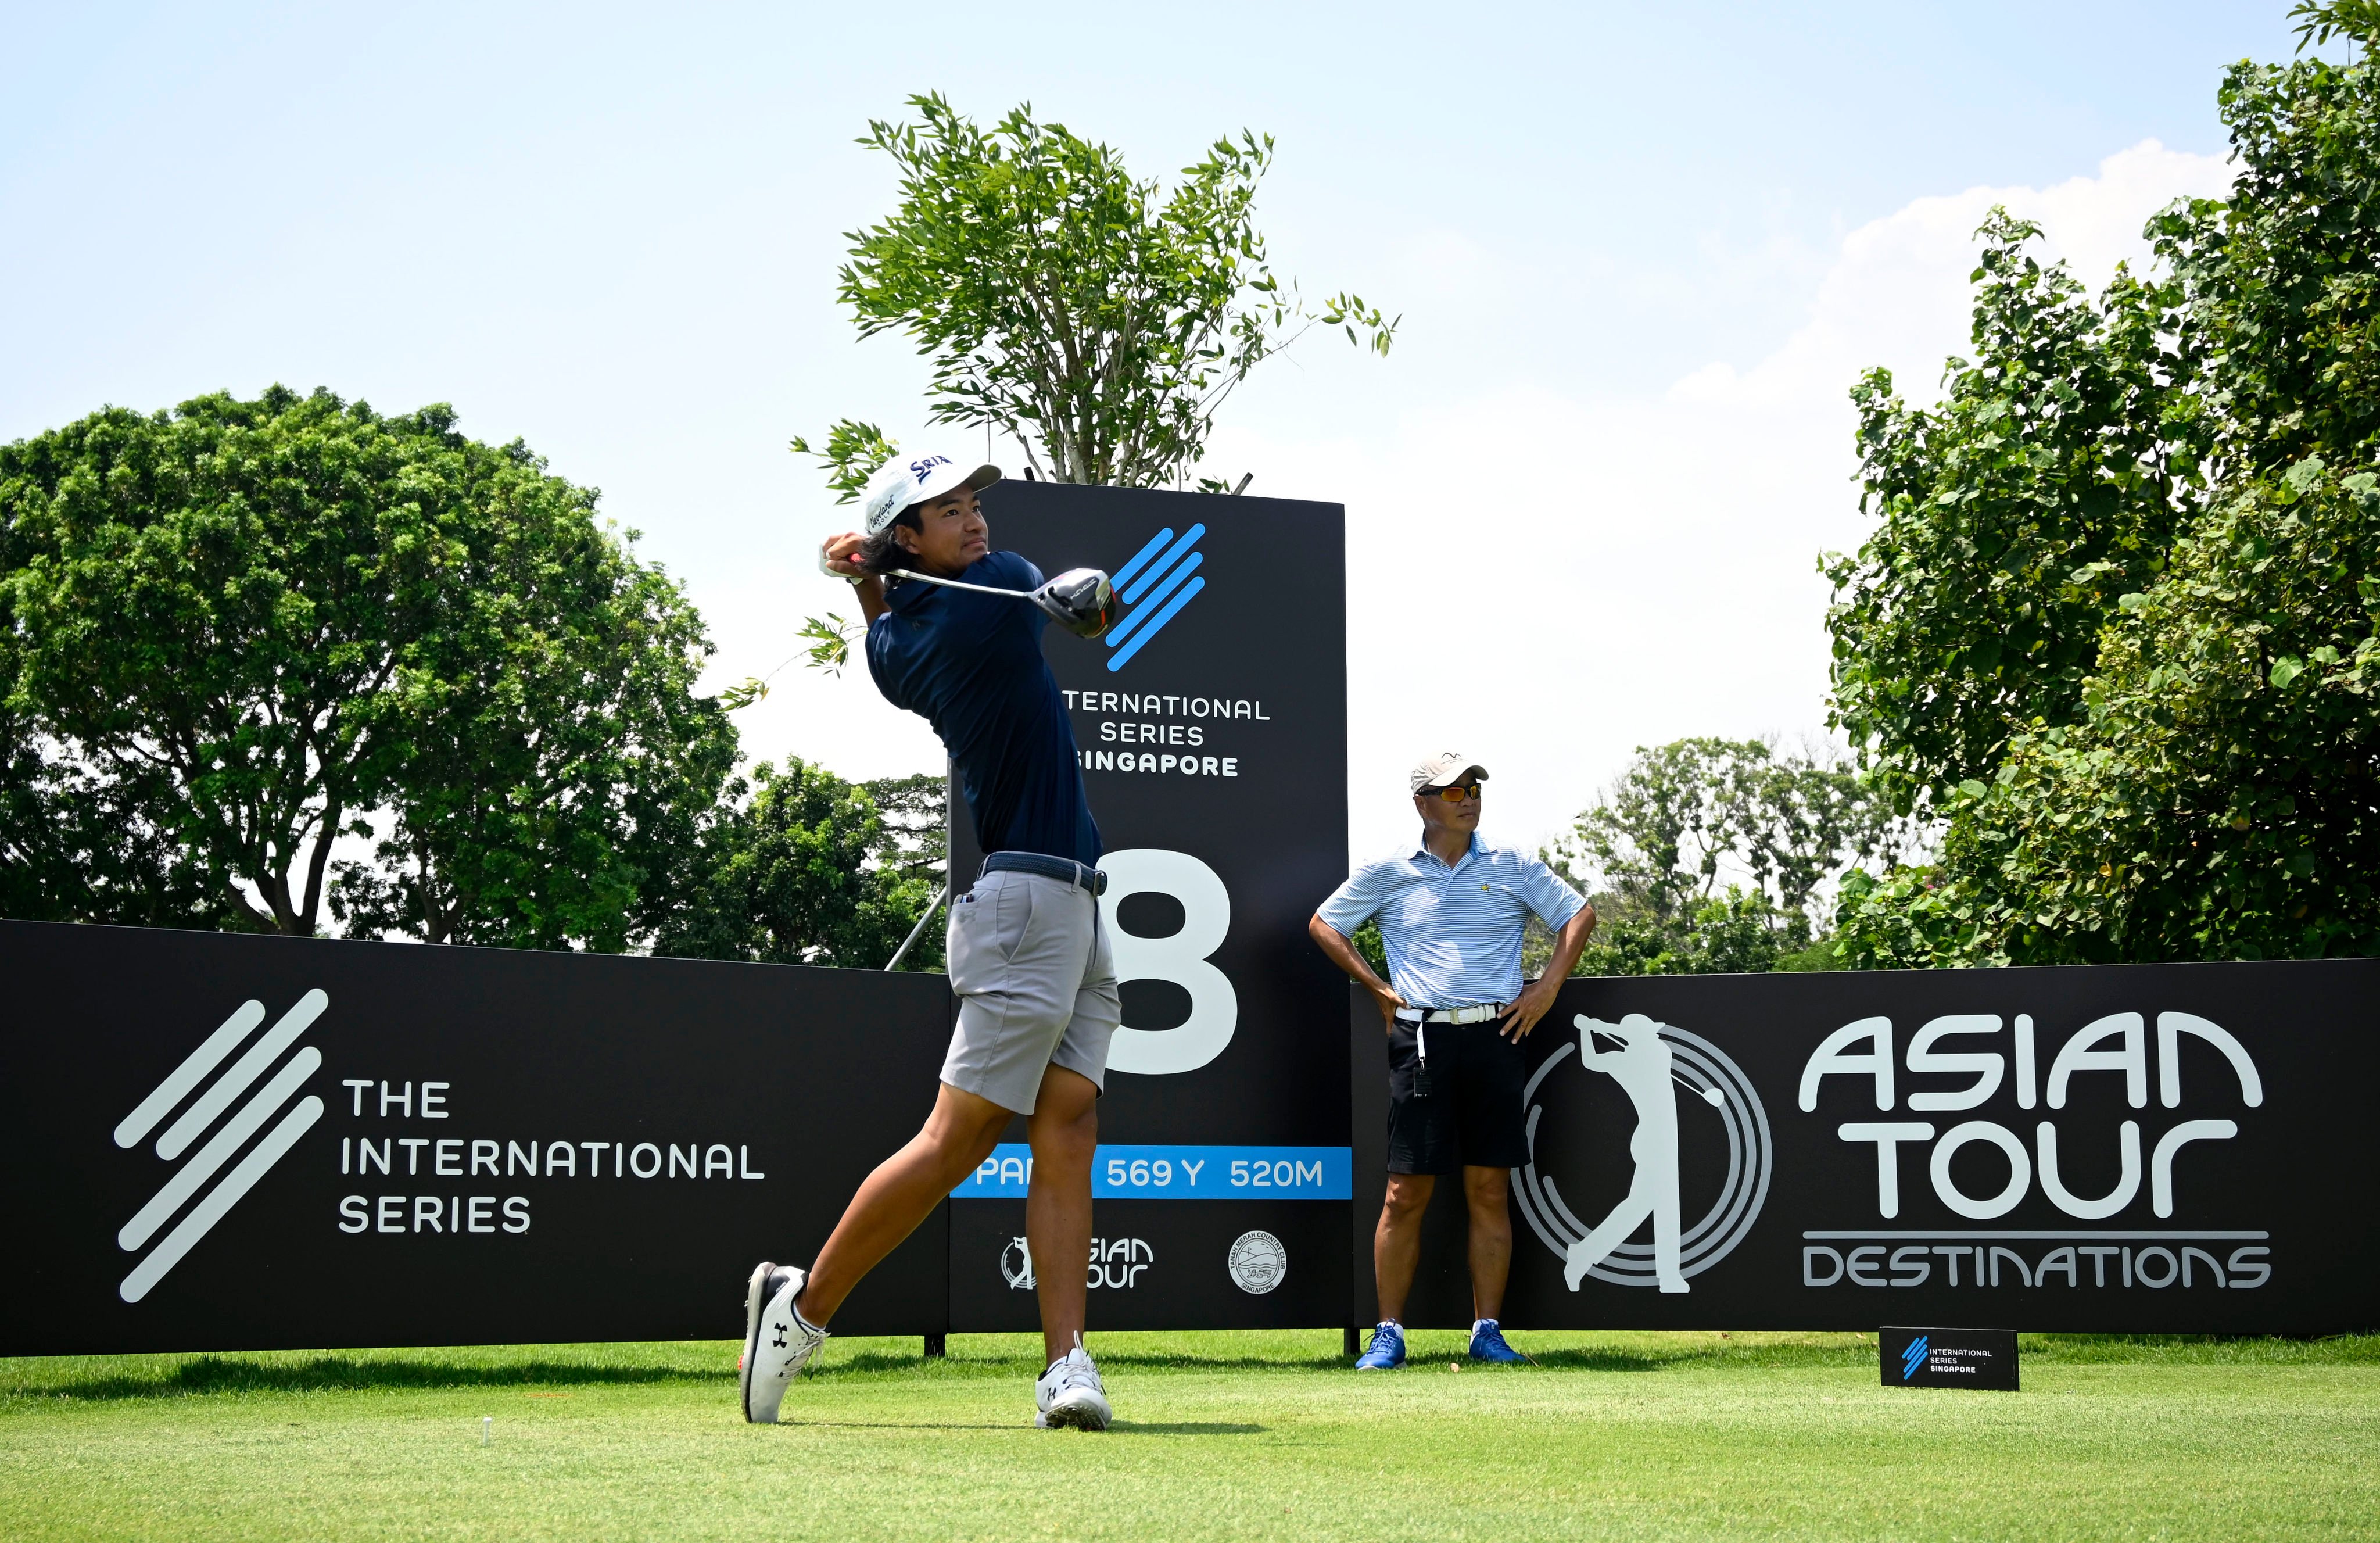 Taichi Kho tees off during a practice round ahead of the International Series Singapore in August, 2022. Photo: Asian Tour.